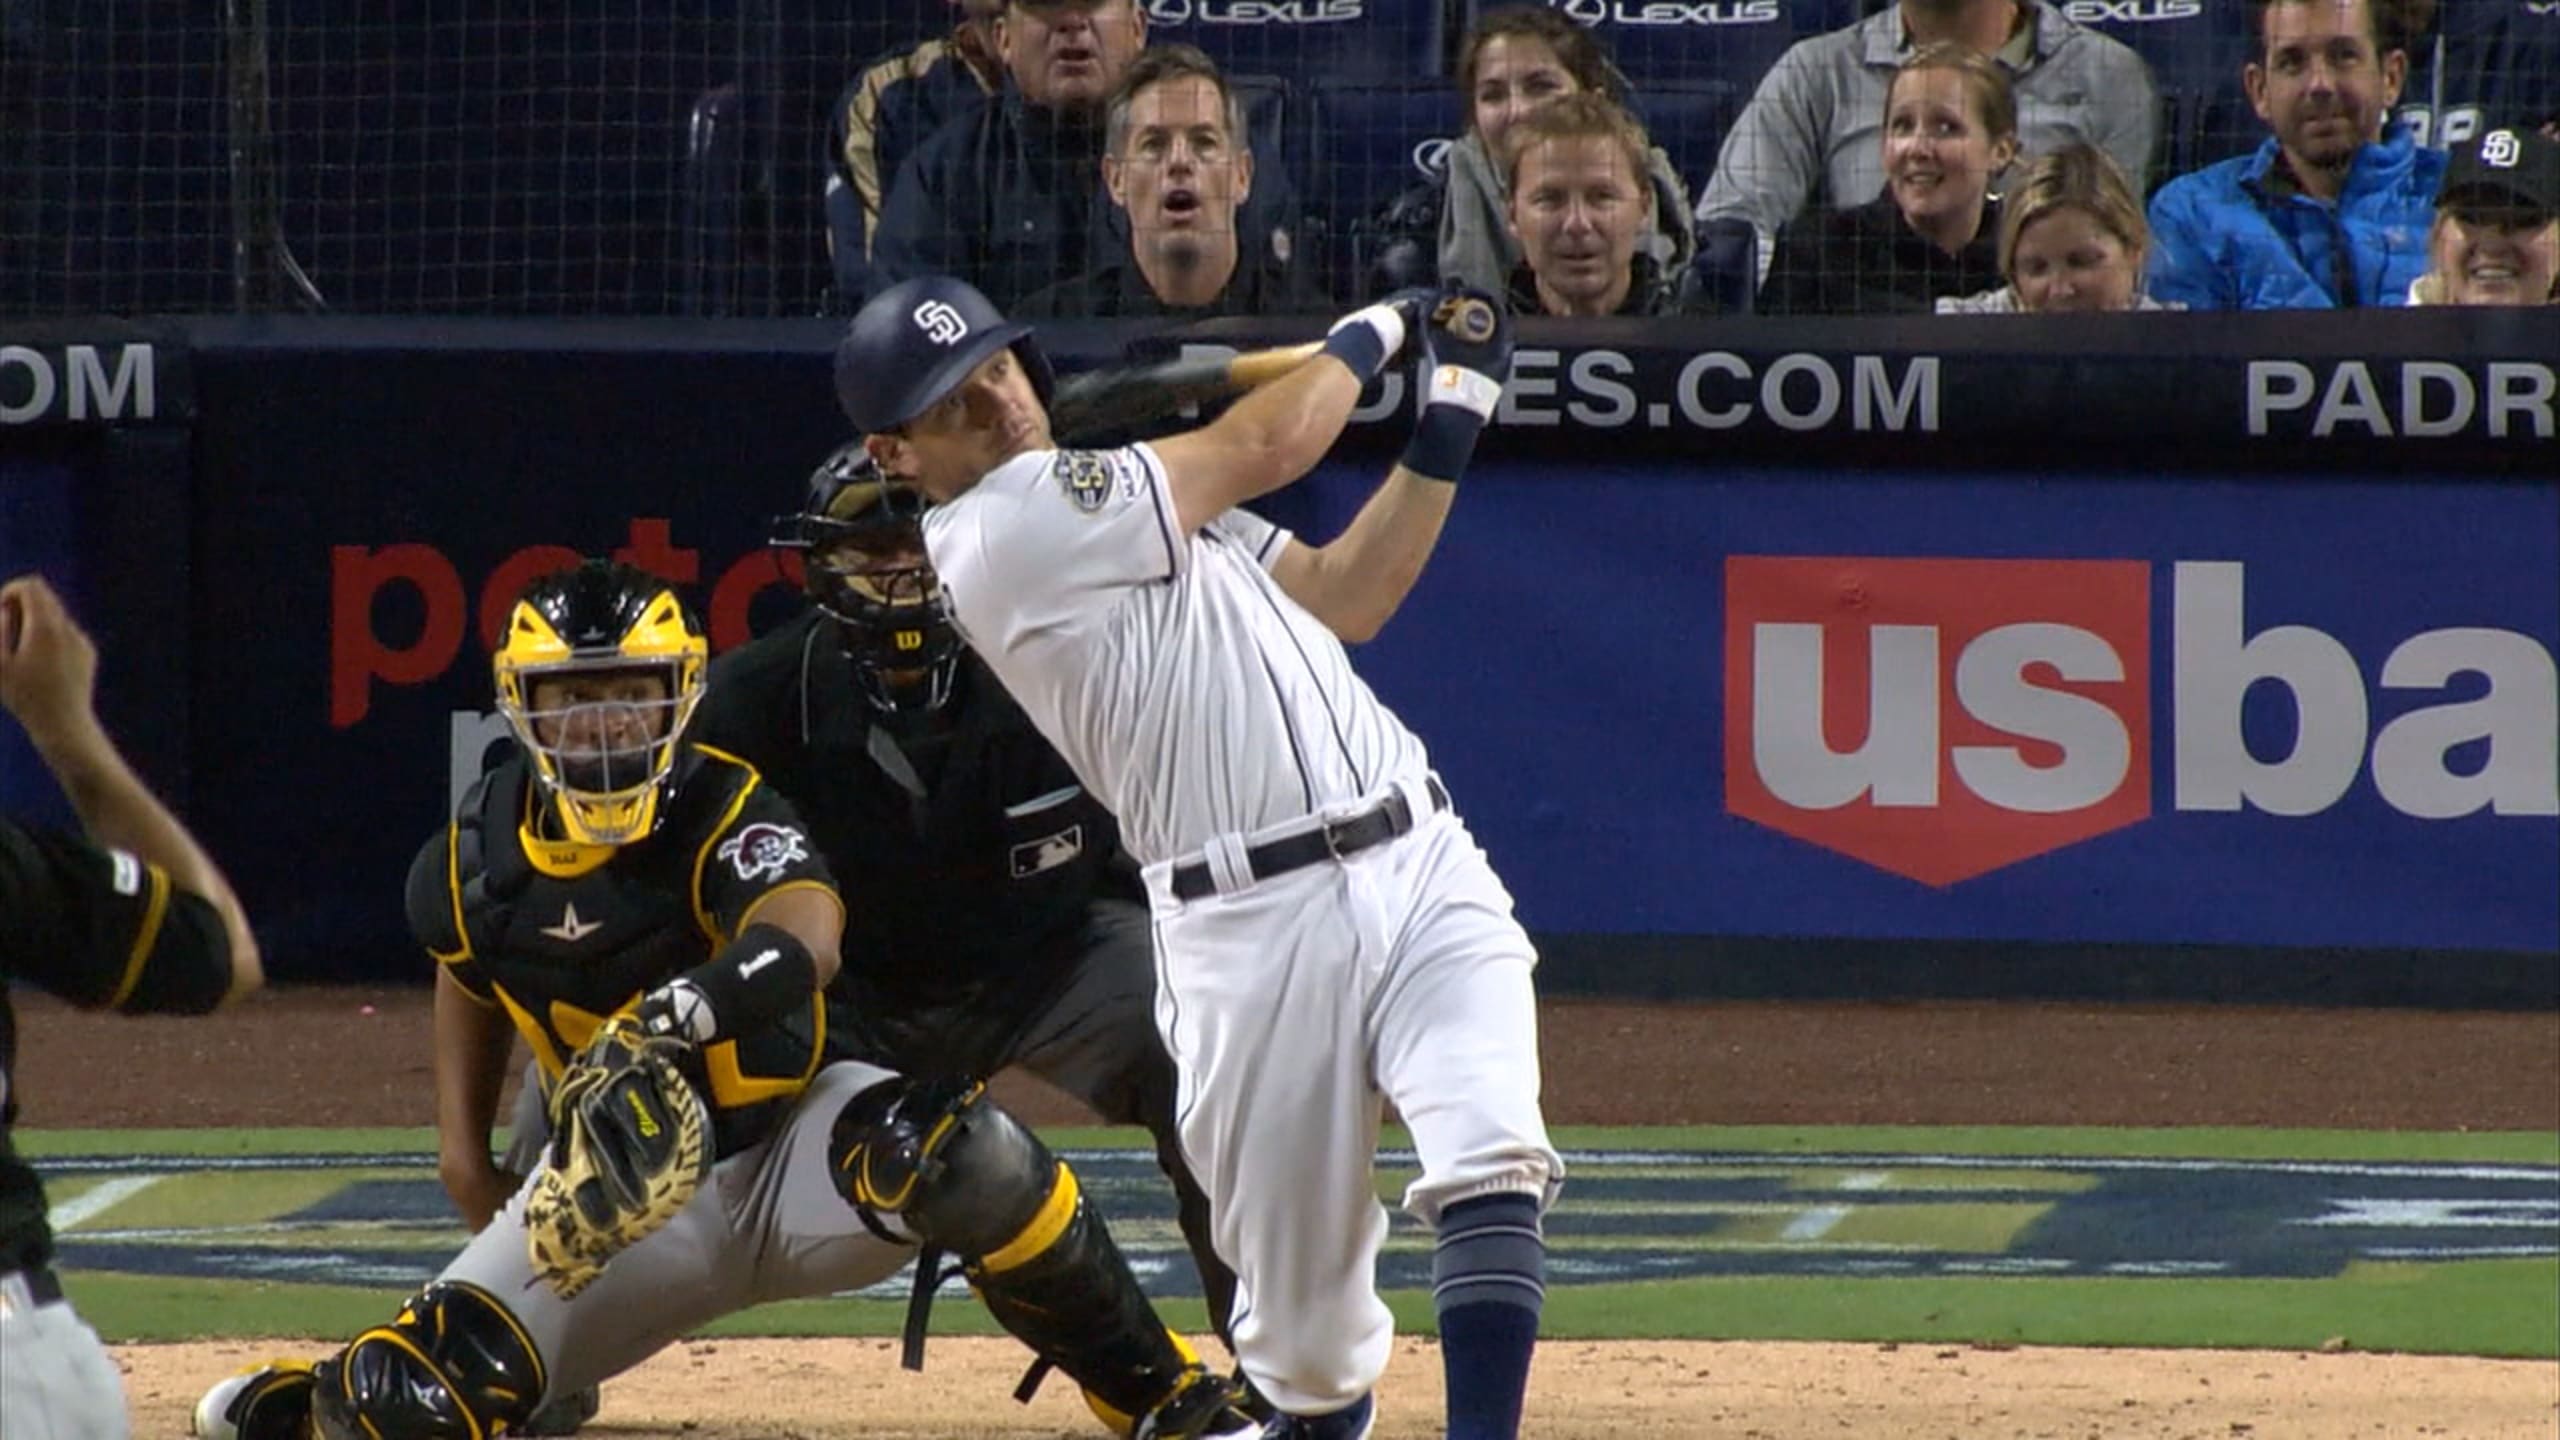 Padres' Ian Kinsler erupts with f-bombs at own fans after homer 